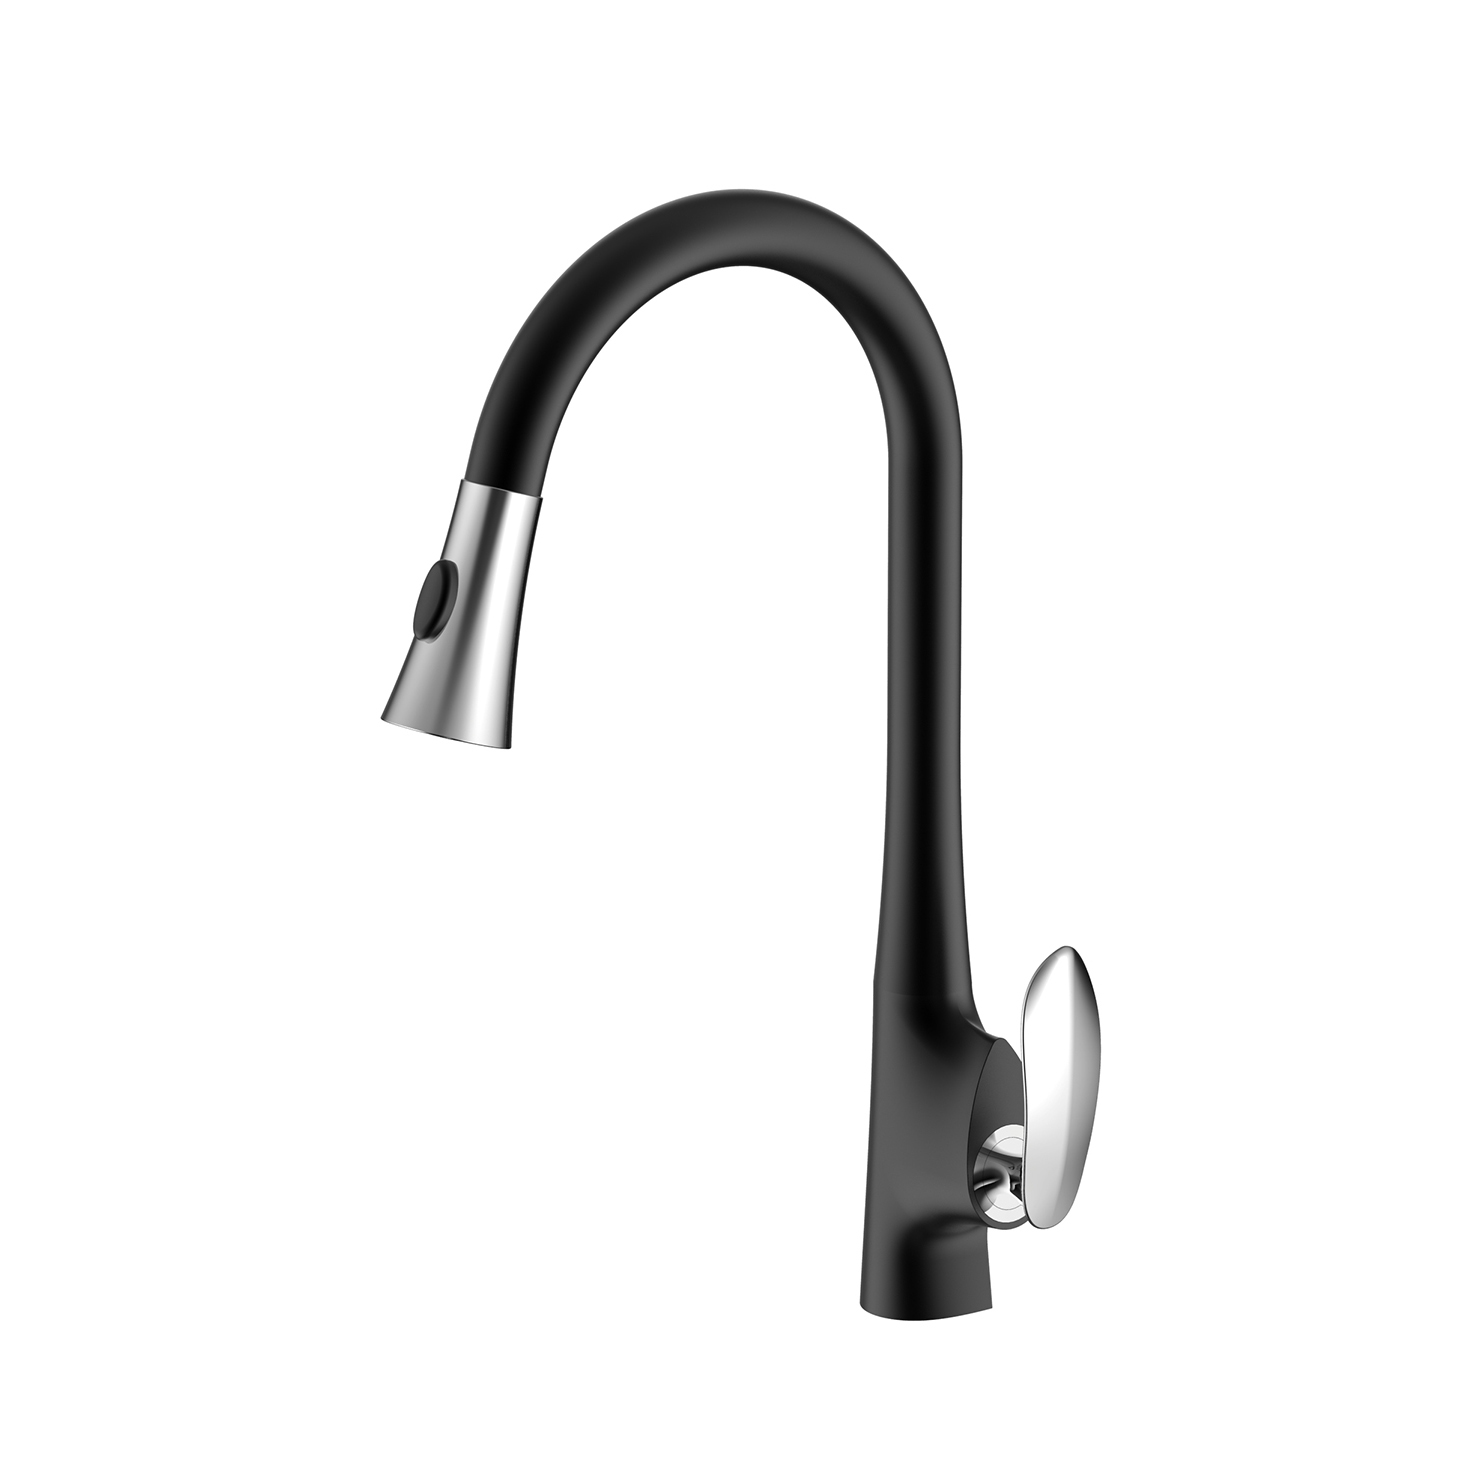 Aquacubic cUPC High quality Matte Black and Chrome Finish Kitchen Faucet with Sprayer